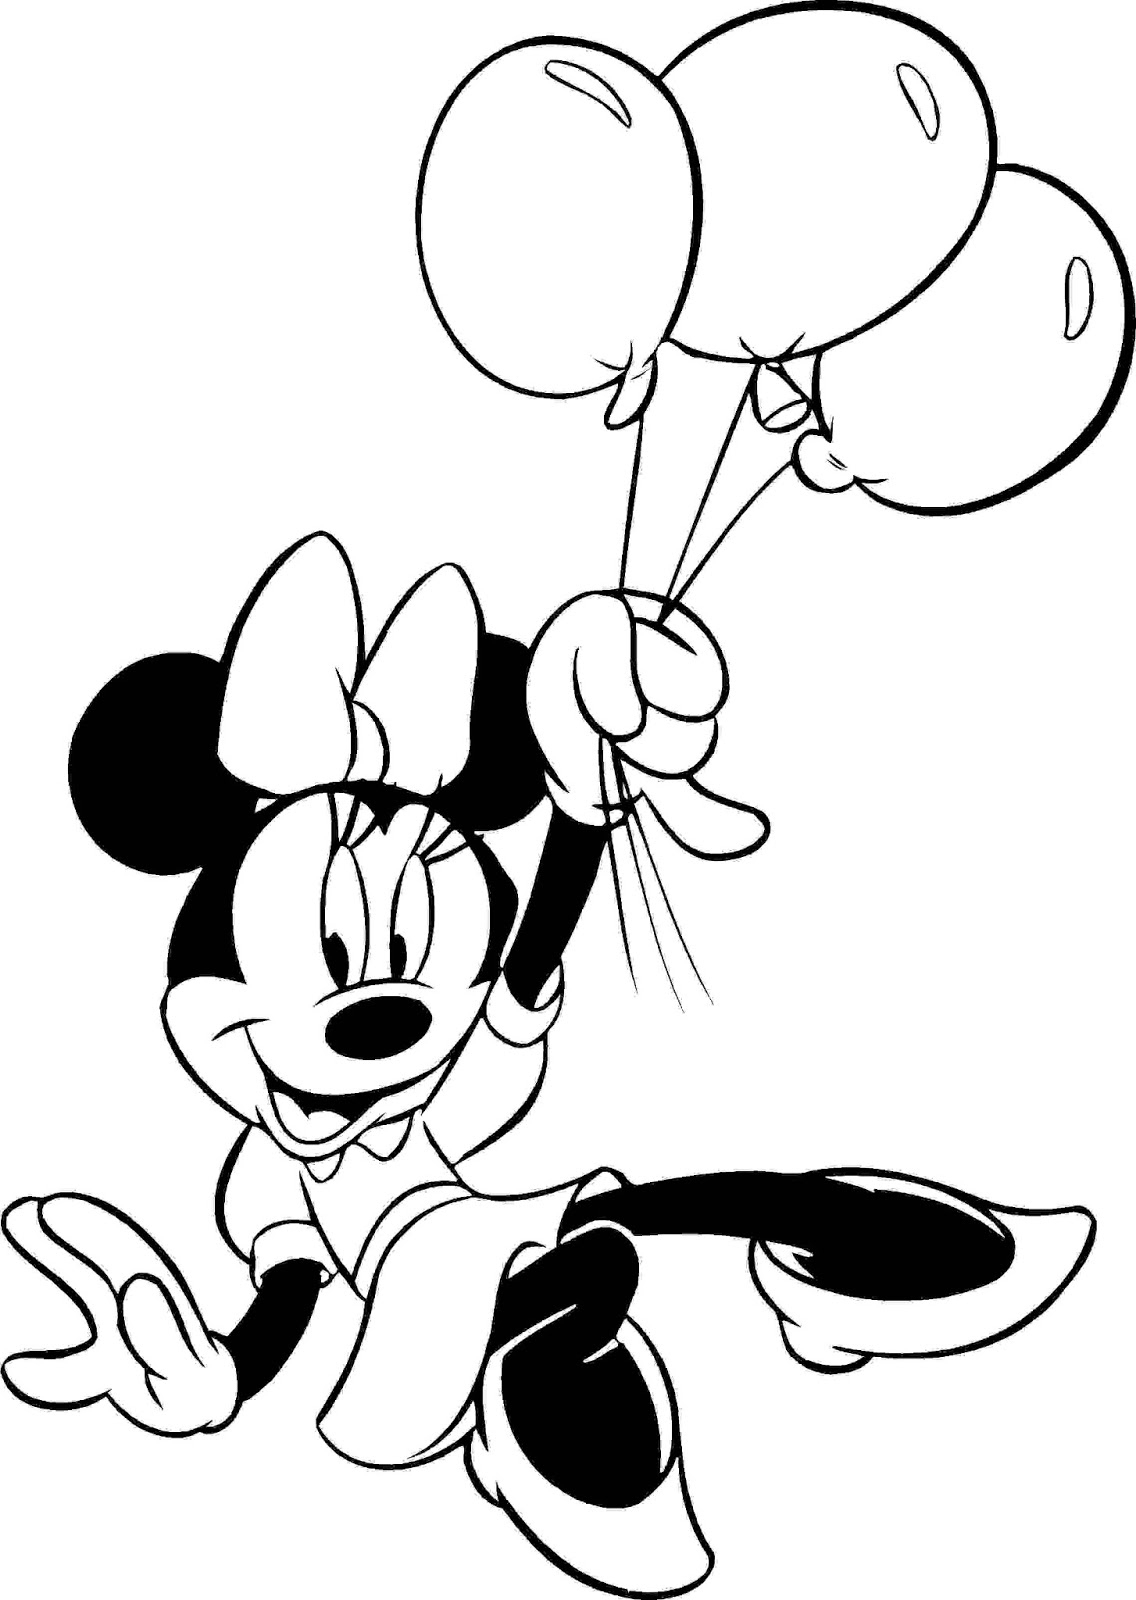 Coloring Pages : Minnie Mouse Coloring Pages Pdfeets Freeminnie - Free Printable Minnie Mouse Coloring Pages